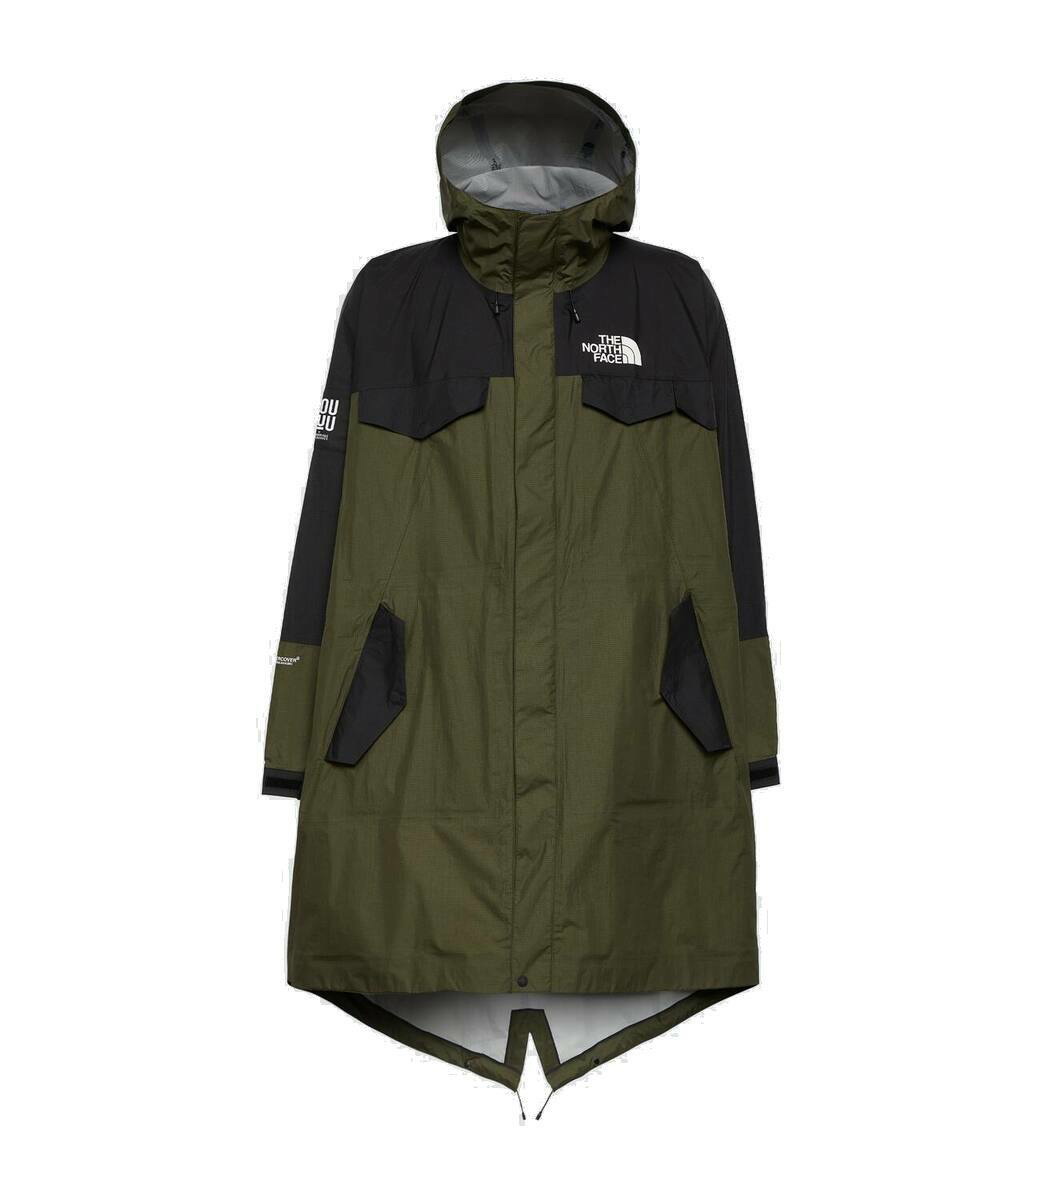 Photo: The North Face x Undercover parka